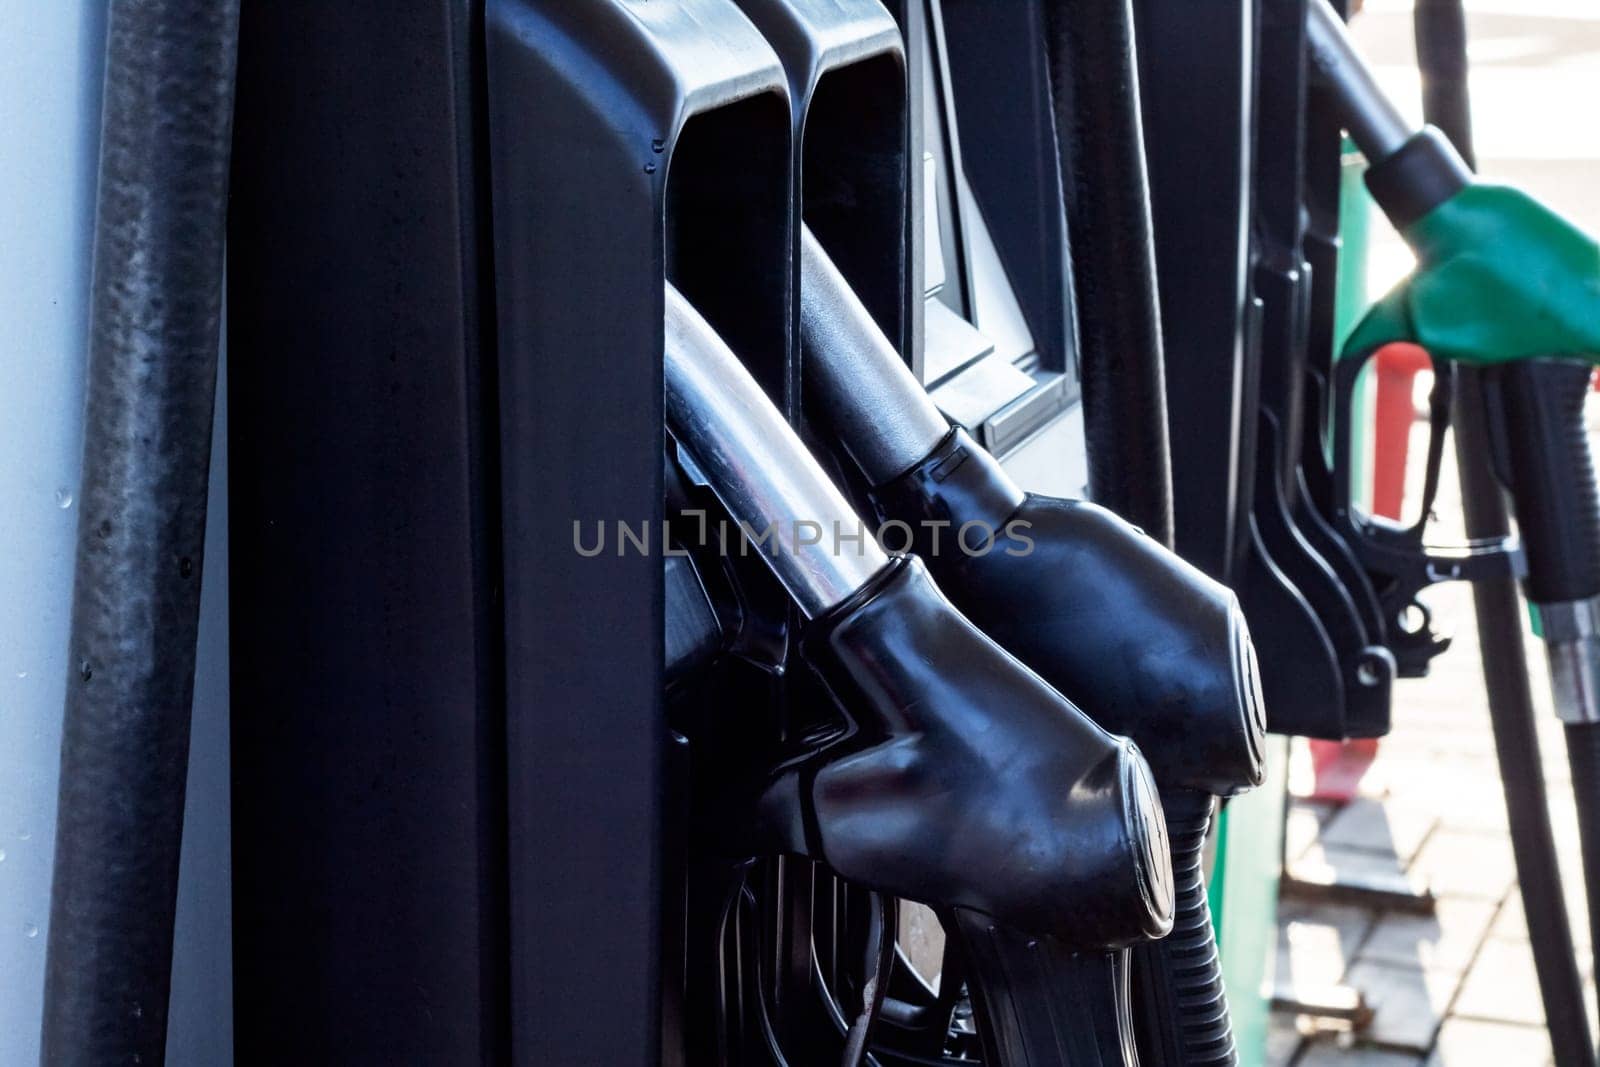 Refueling pistols at a gas station close up, copy space